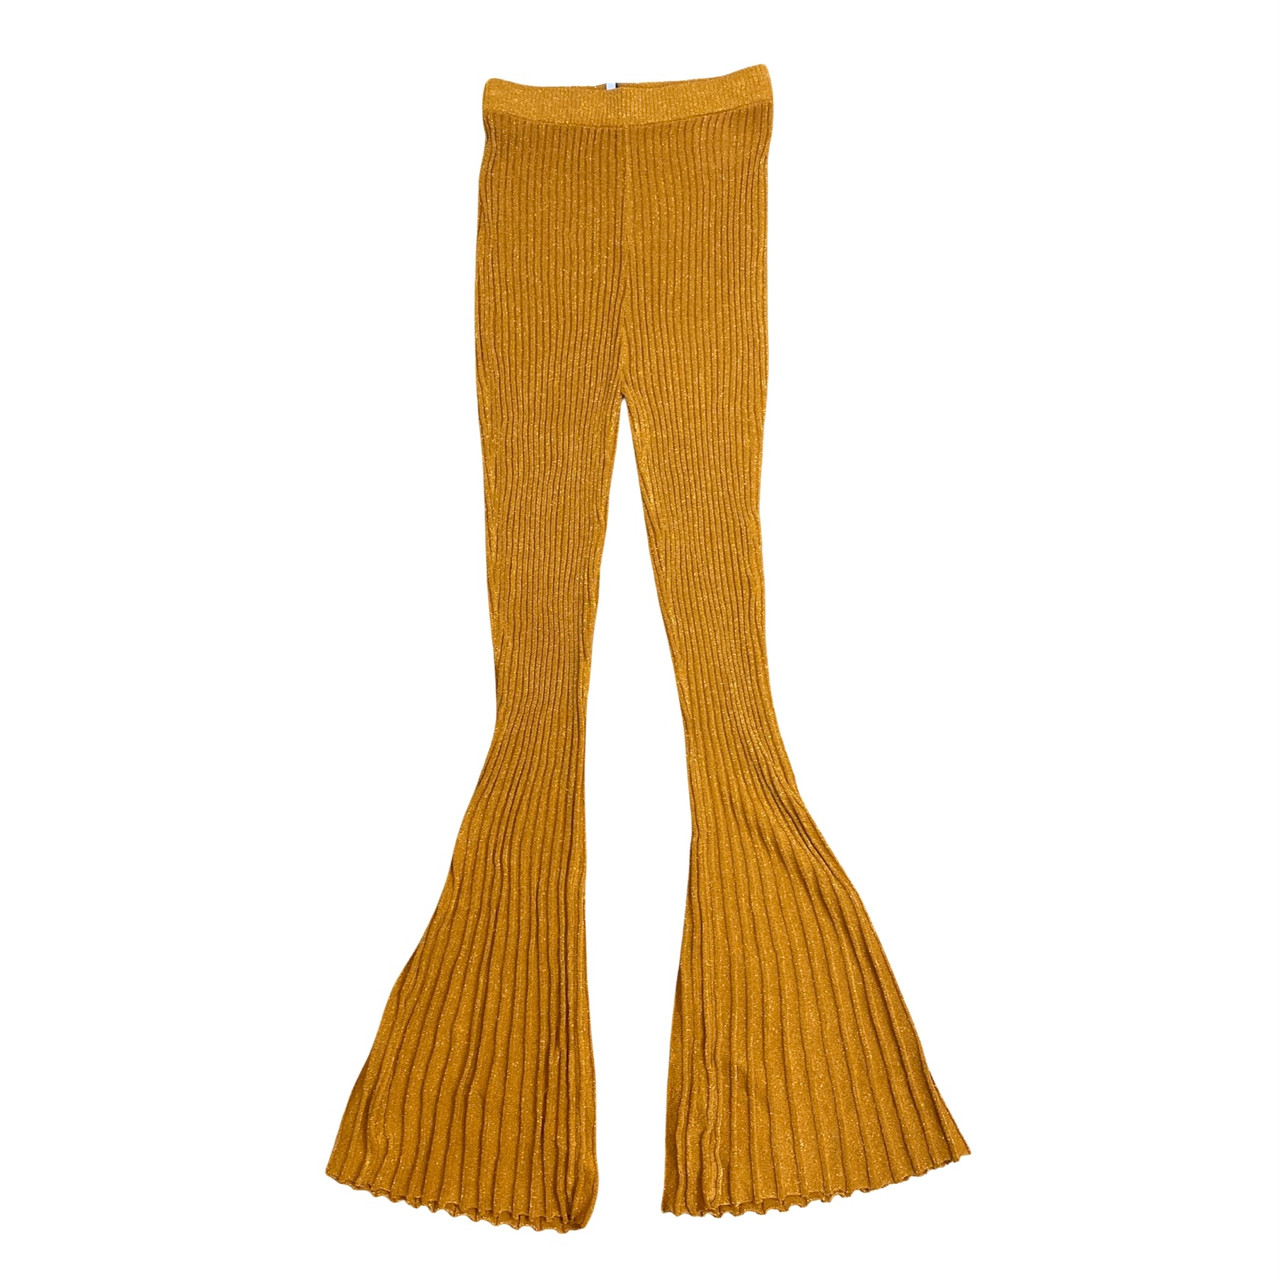  Other Stories Ribbed Knit Glitter Flare Pants